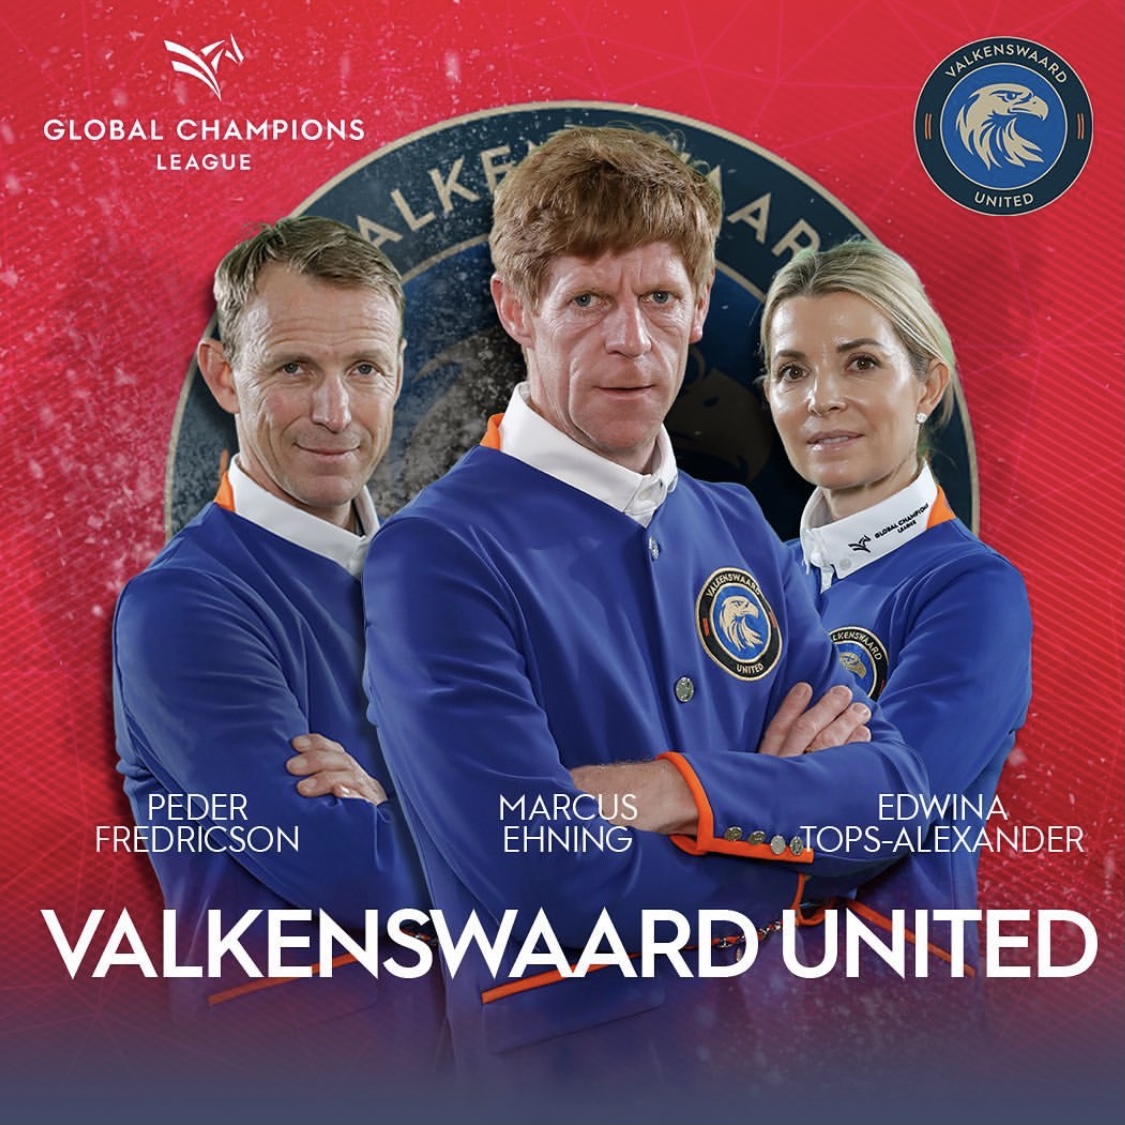 Valkenswaard United are the 2021 GCL Champions